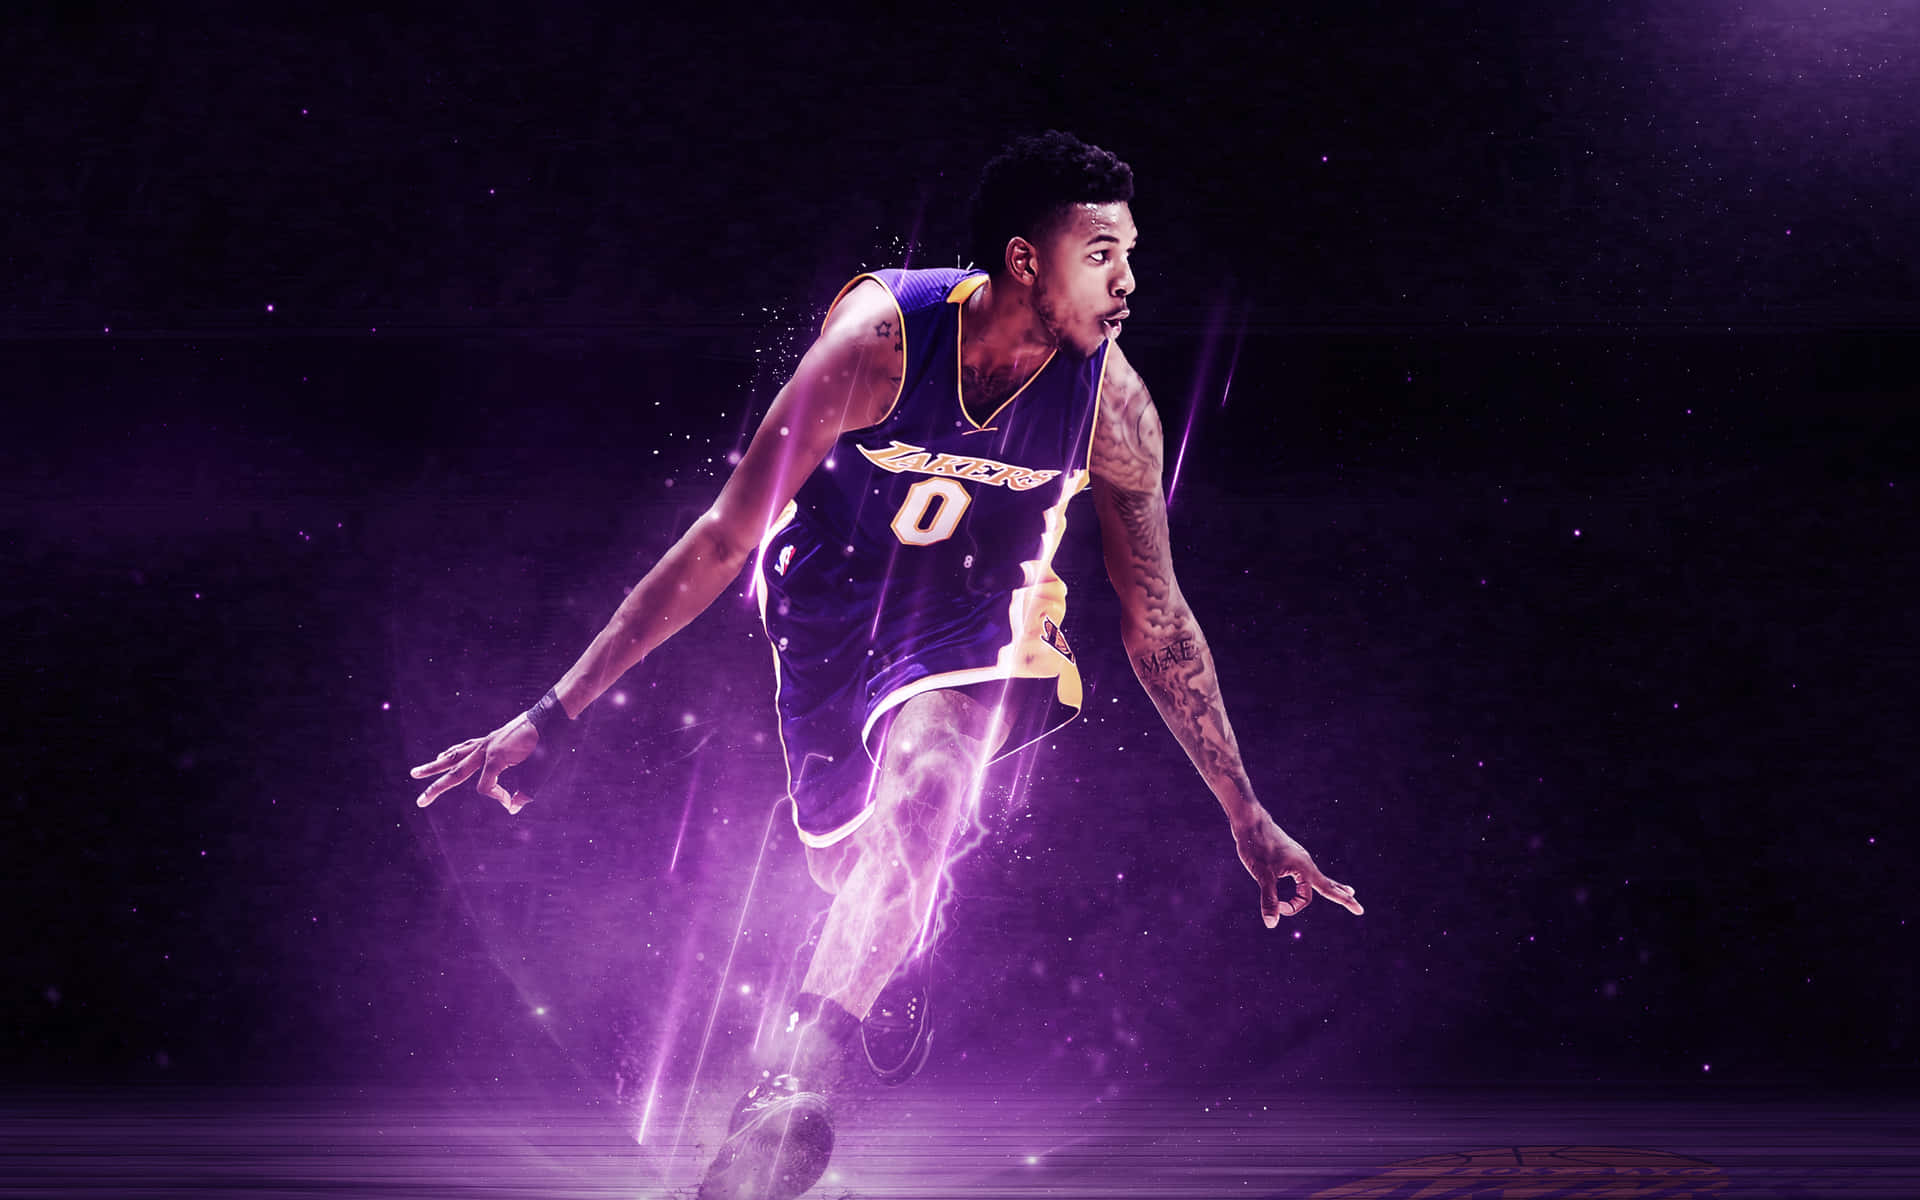 Nickyoung Is A Professional Basketball Player Who Has Played For Teams Such As The Golden State Warriors And The Los Angeles Lakers. He Is Known For His Flashy Style On And Off The Court, Earning Him The Nickname 